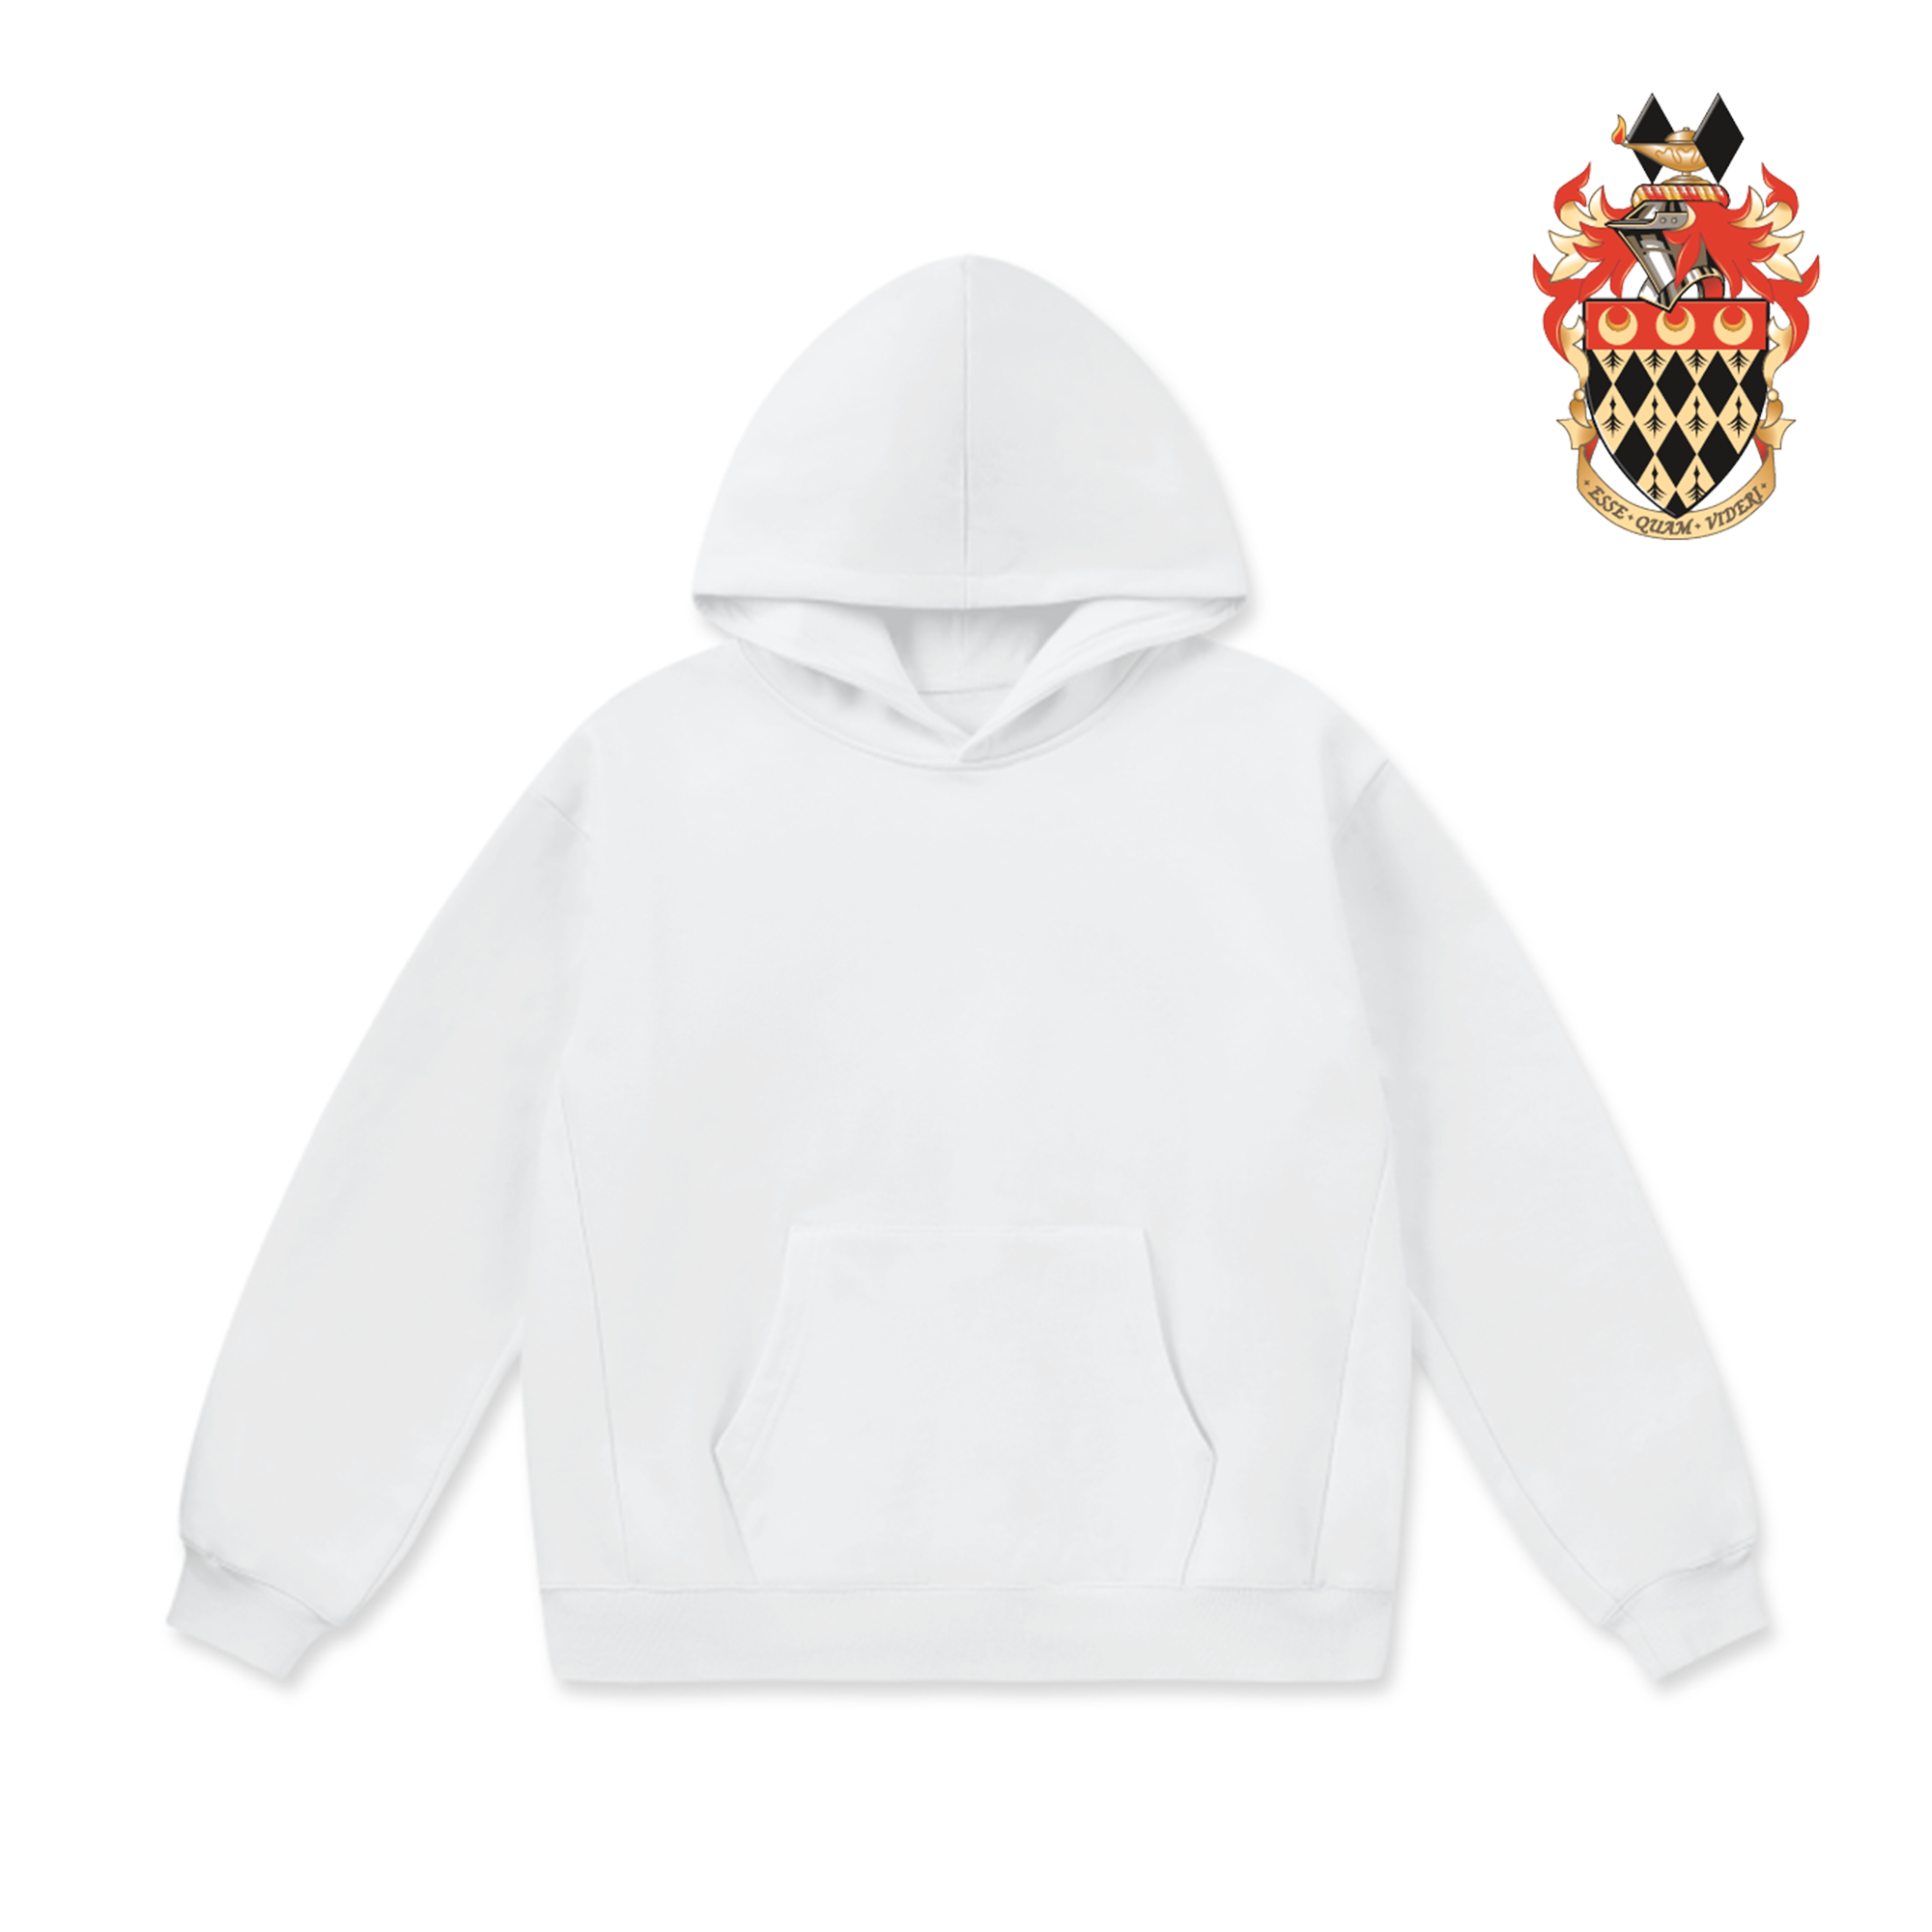 LCC Super Weighted Hoodie - Royal Holloway University of London (Classic Ver.2)